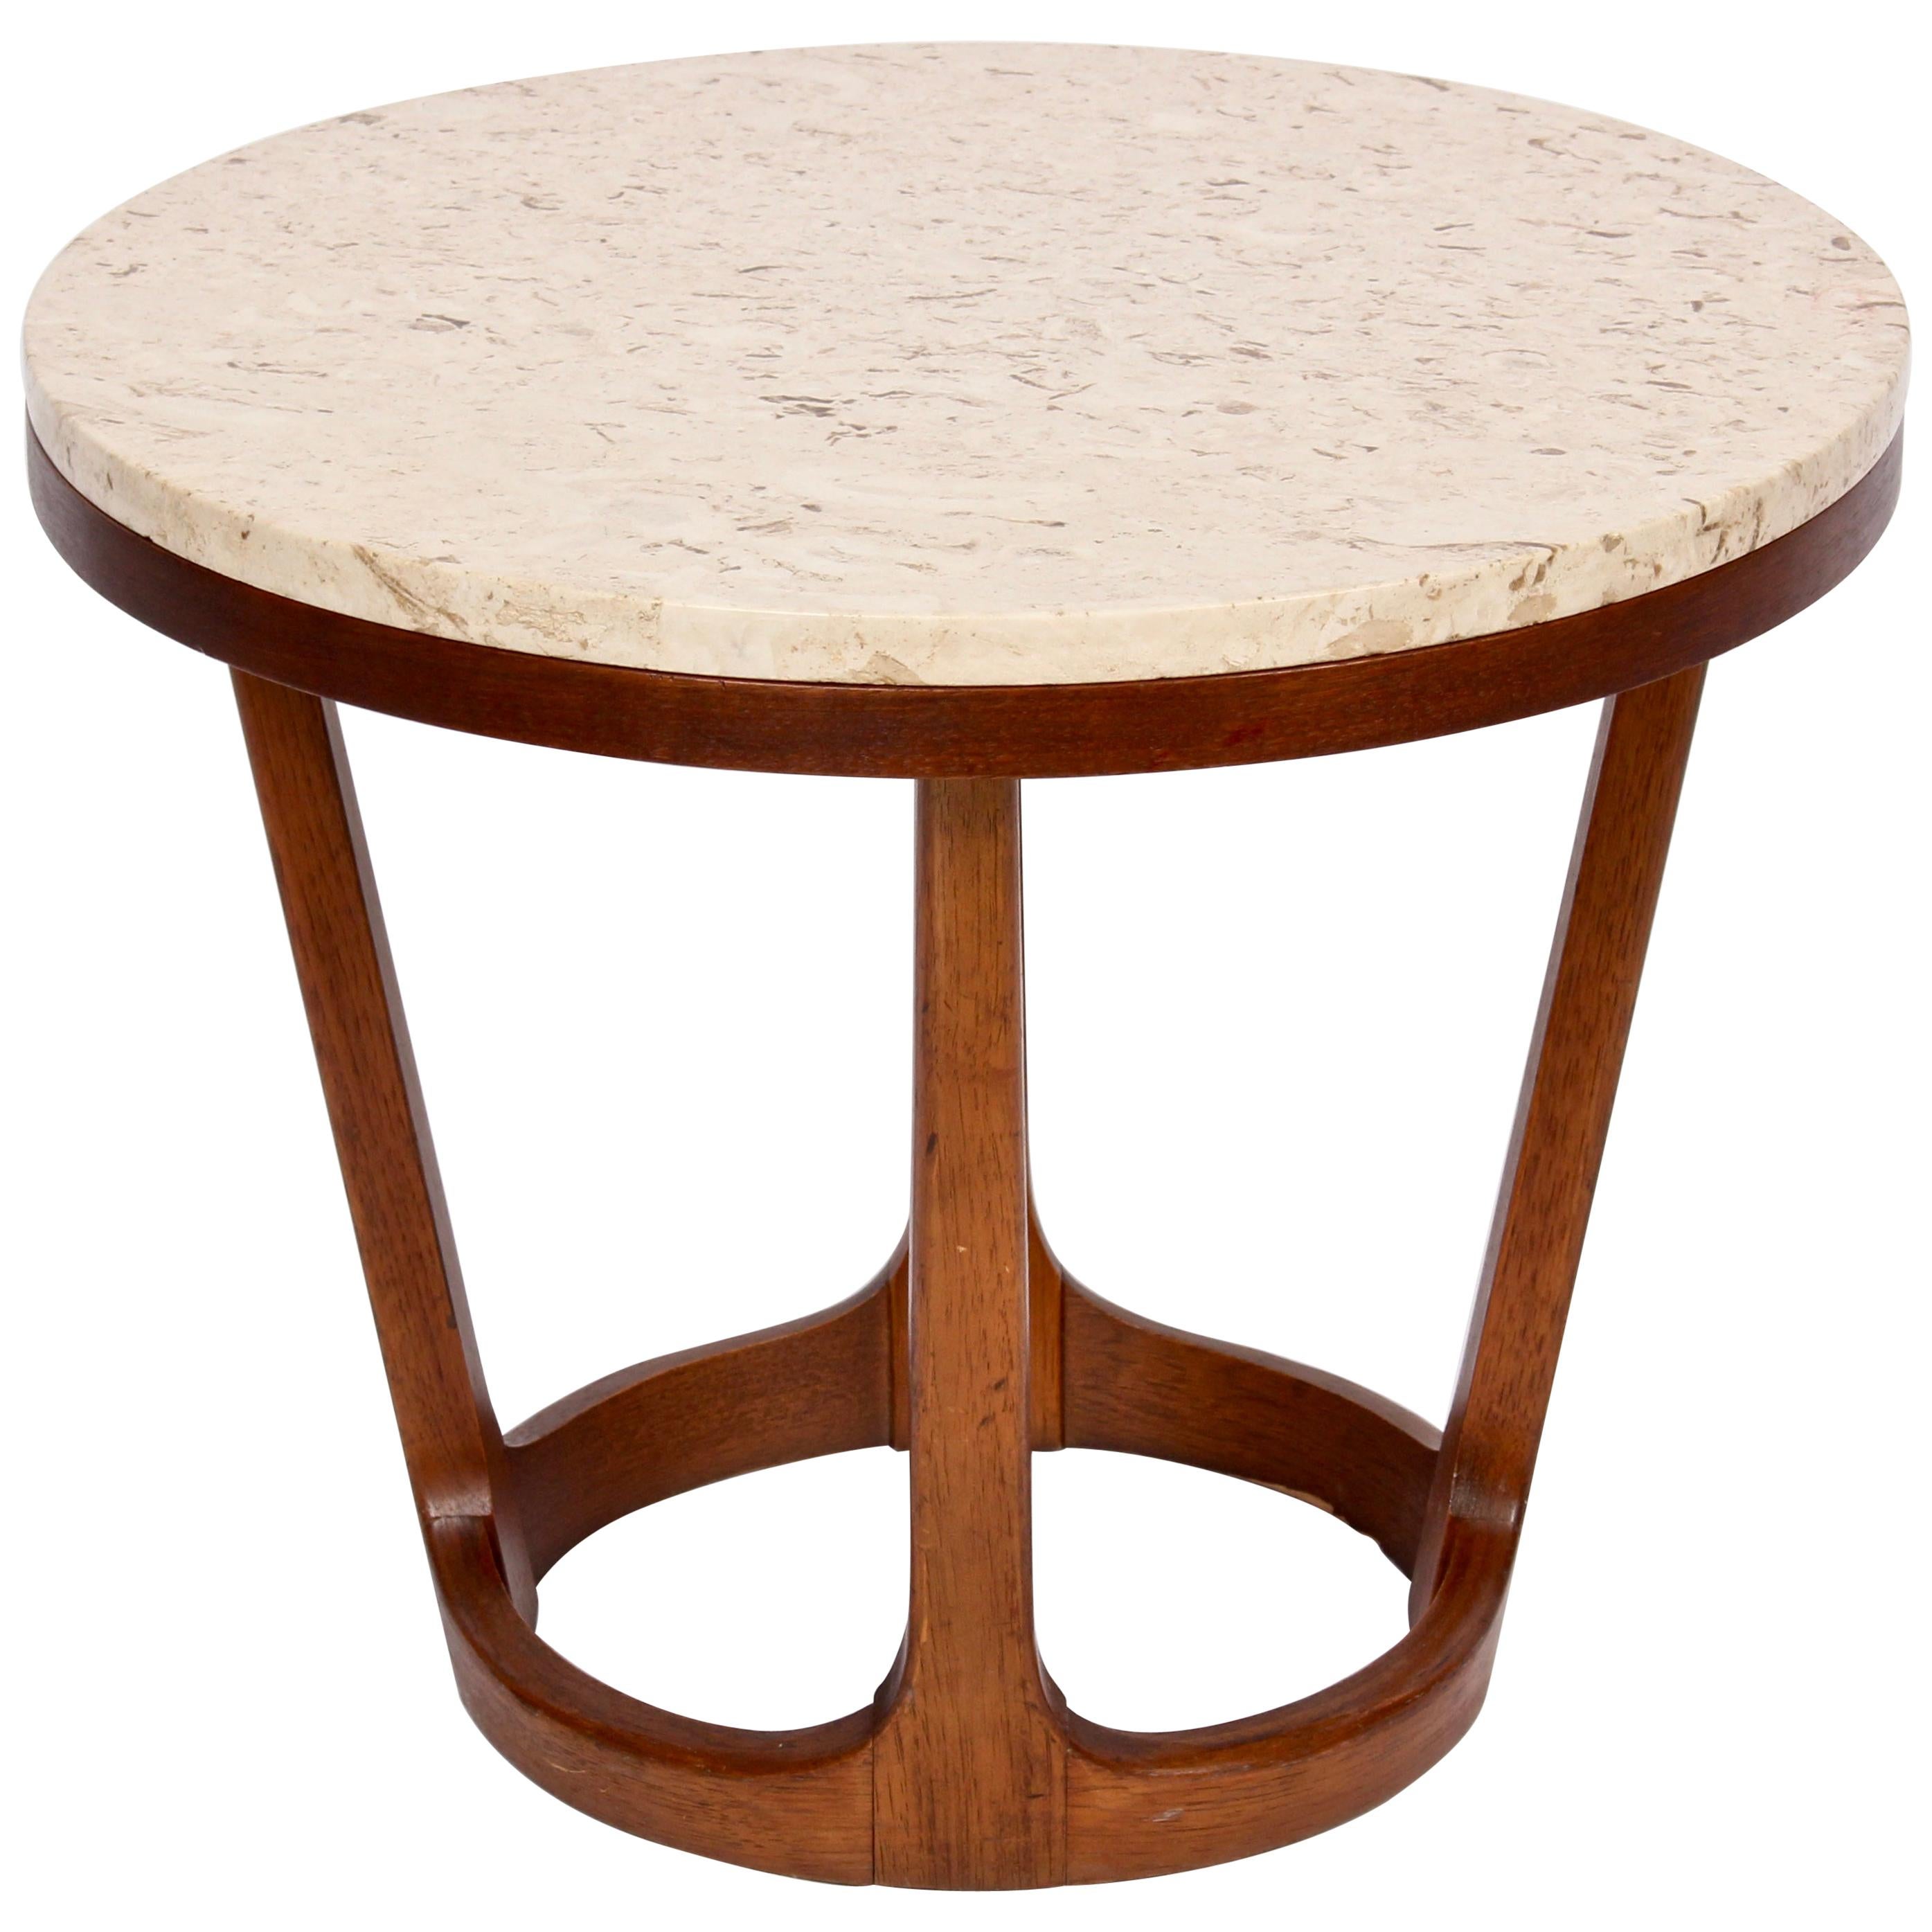 Adrian Pearsall Style Lane Furniture Co. Travertine & Walnut Occasional Table